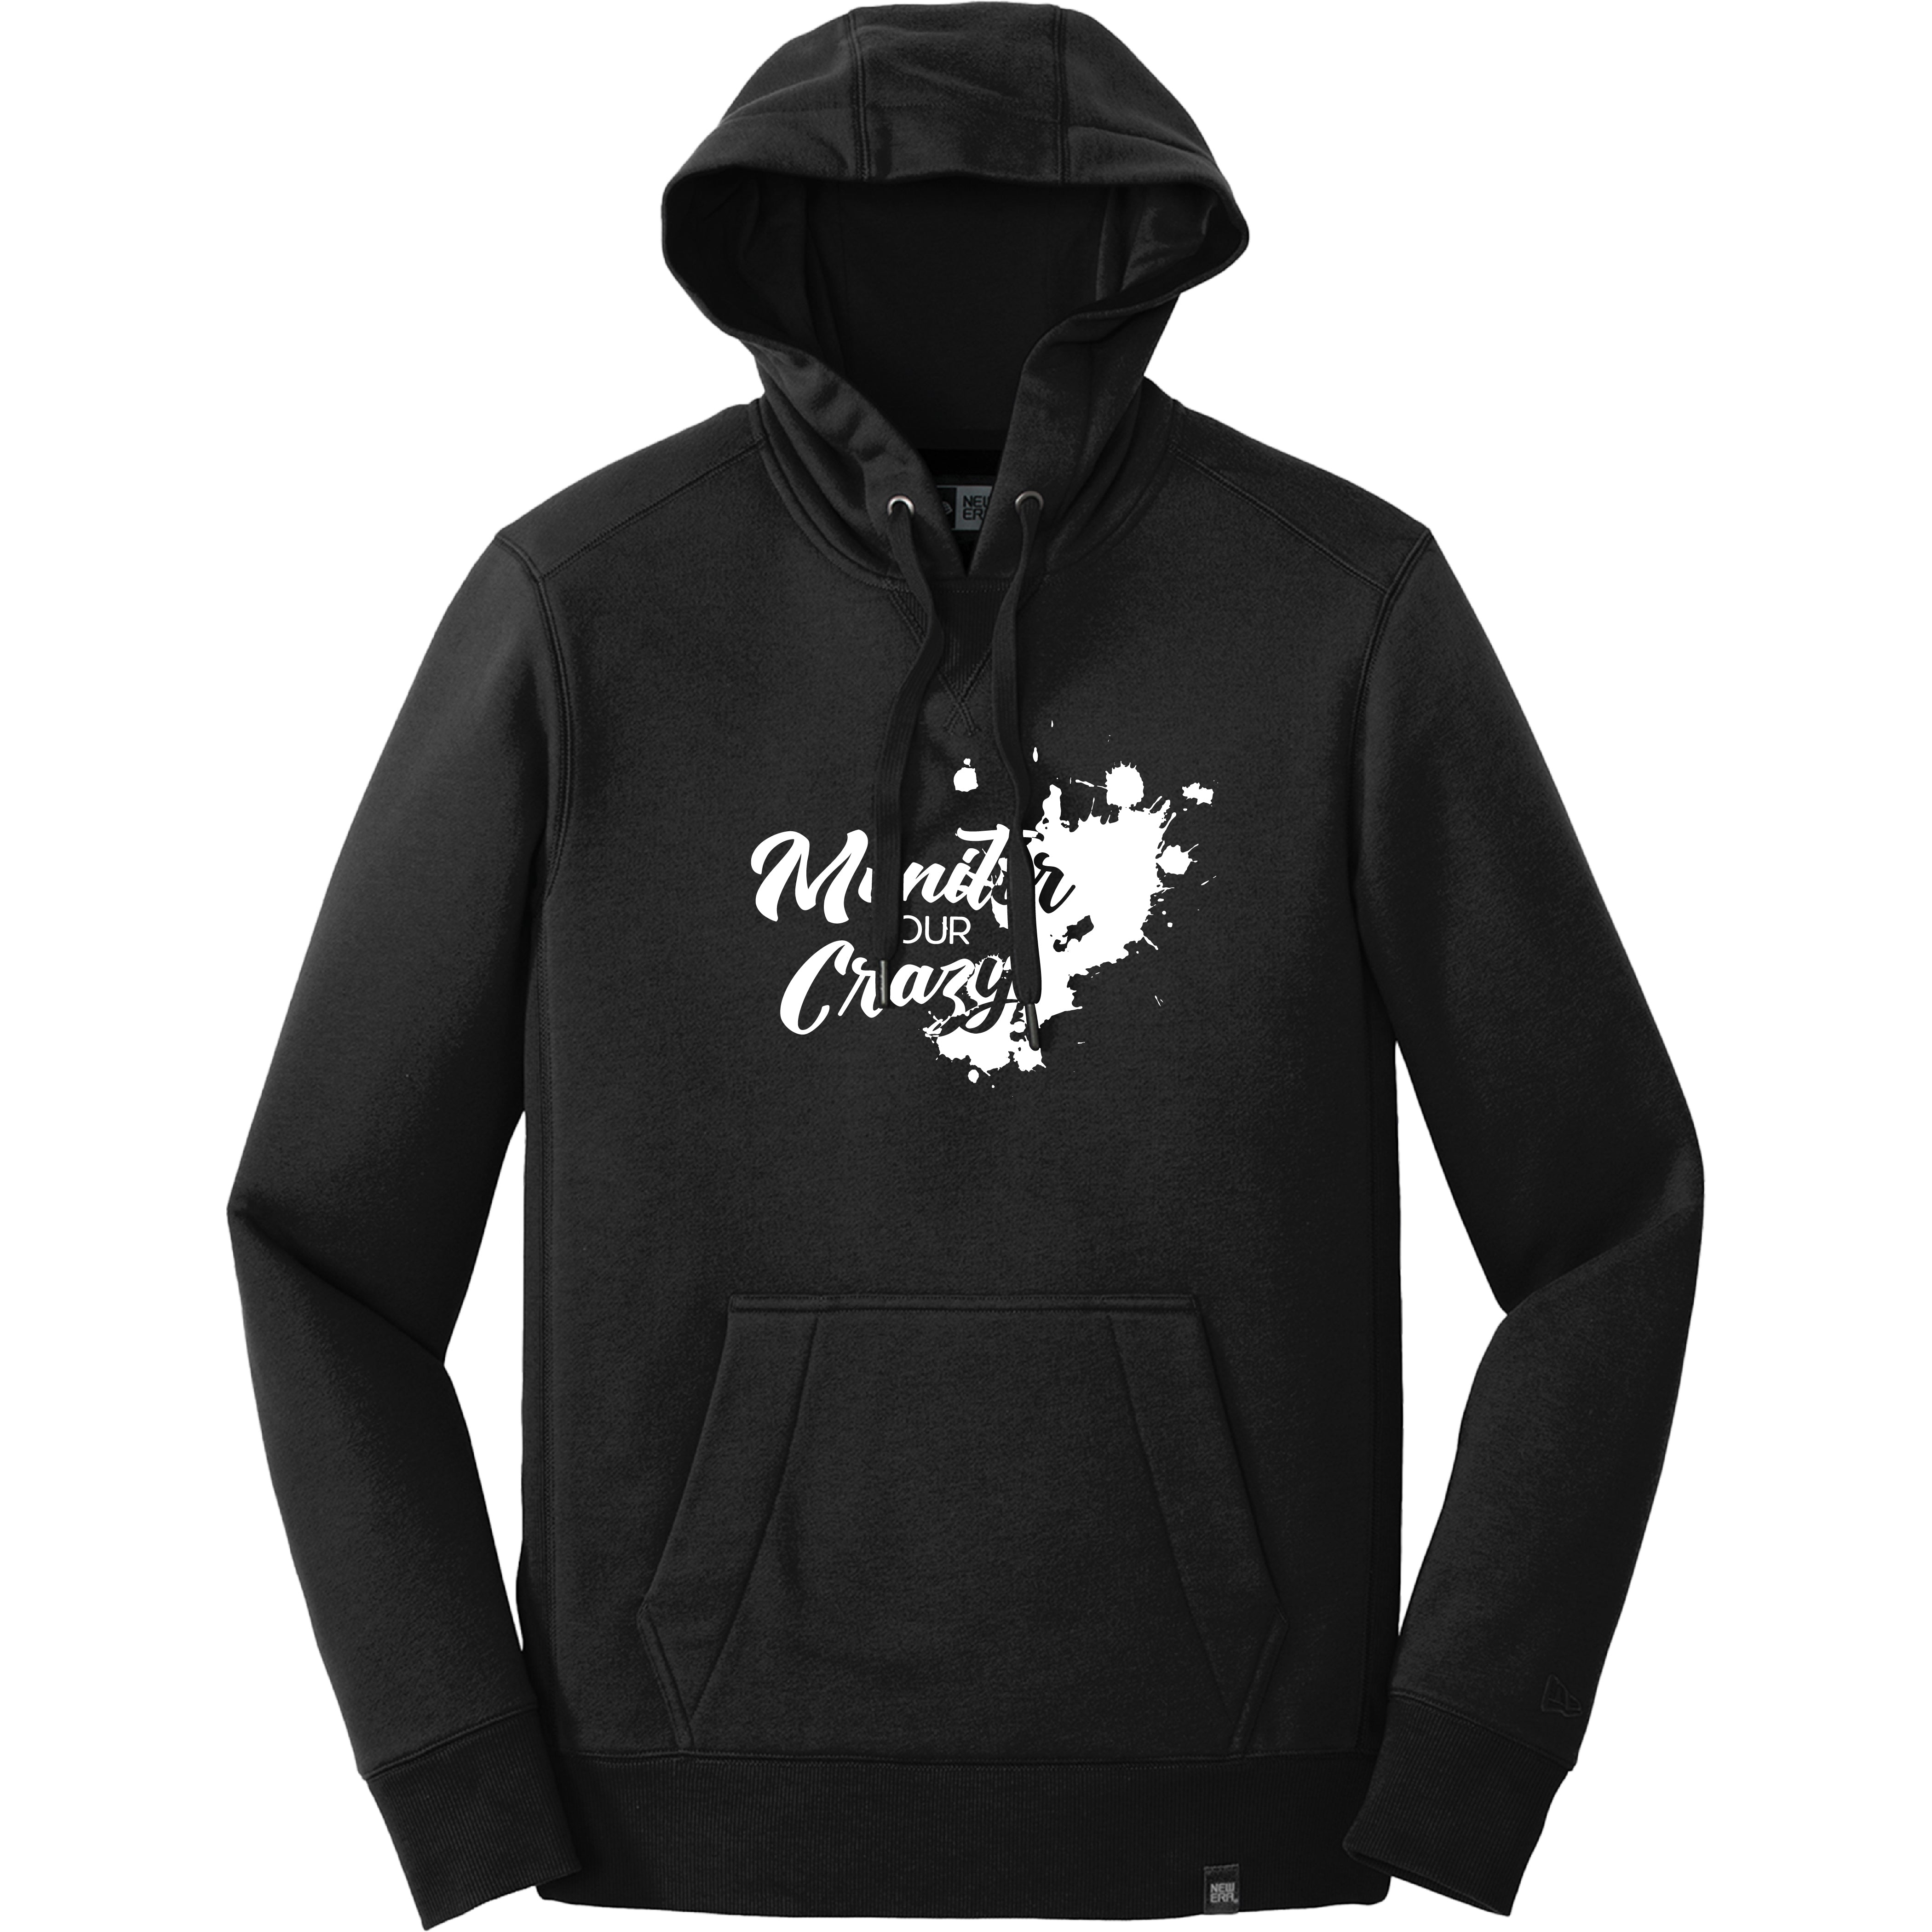 Monitor Your Crazy - Paint Splatter Hoodie